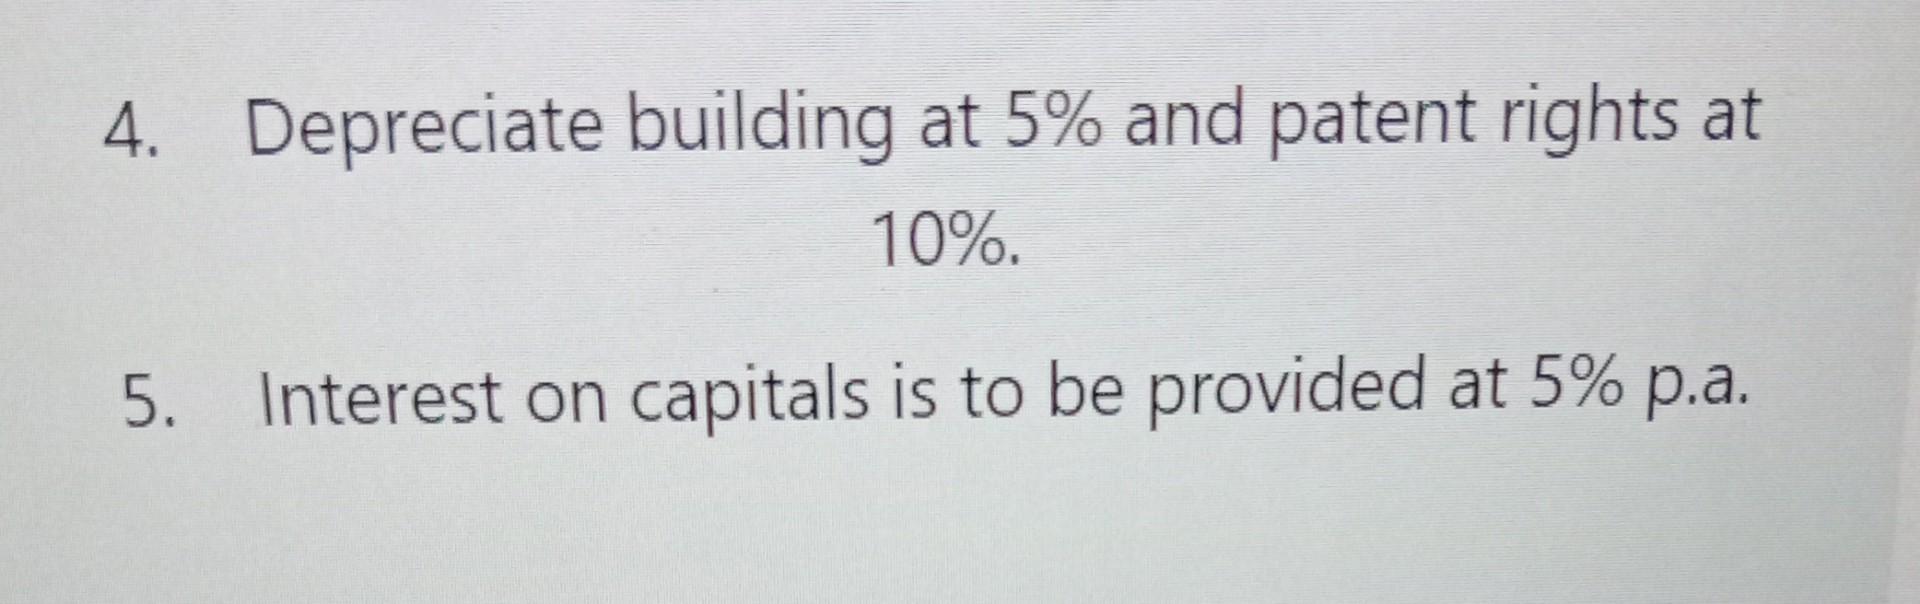 4. Depreciate building at 5% and patent rights at10%.5. Interest on capitals is to be provided at 5% p.a.